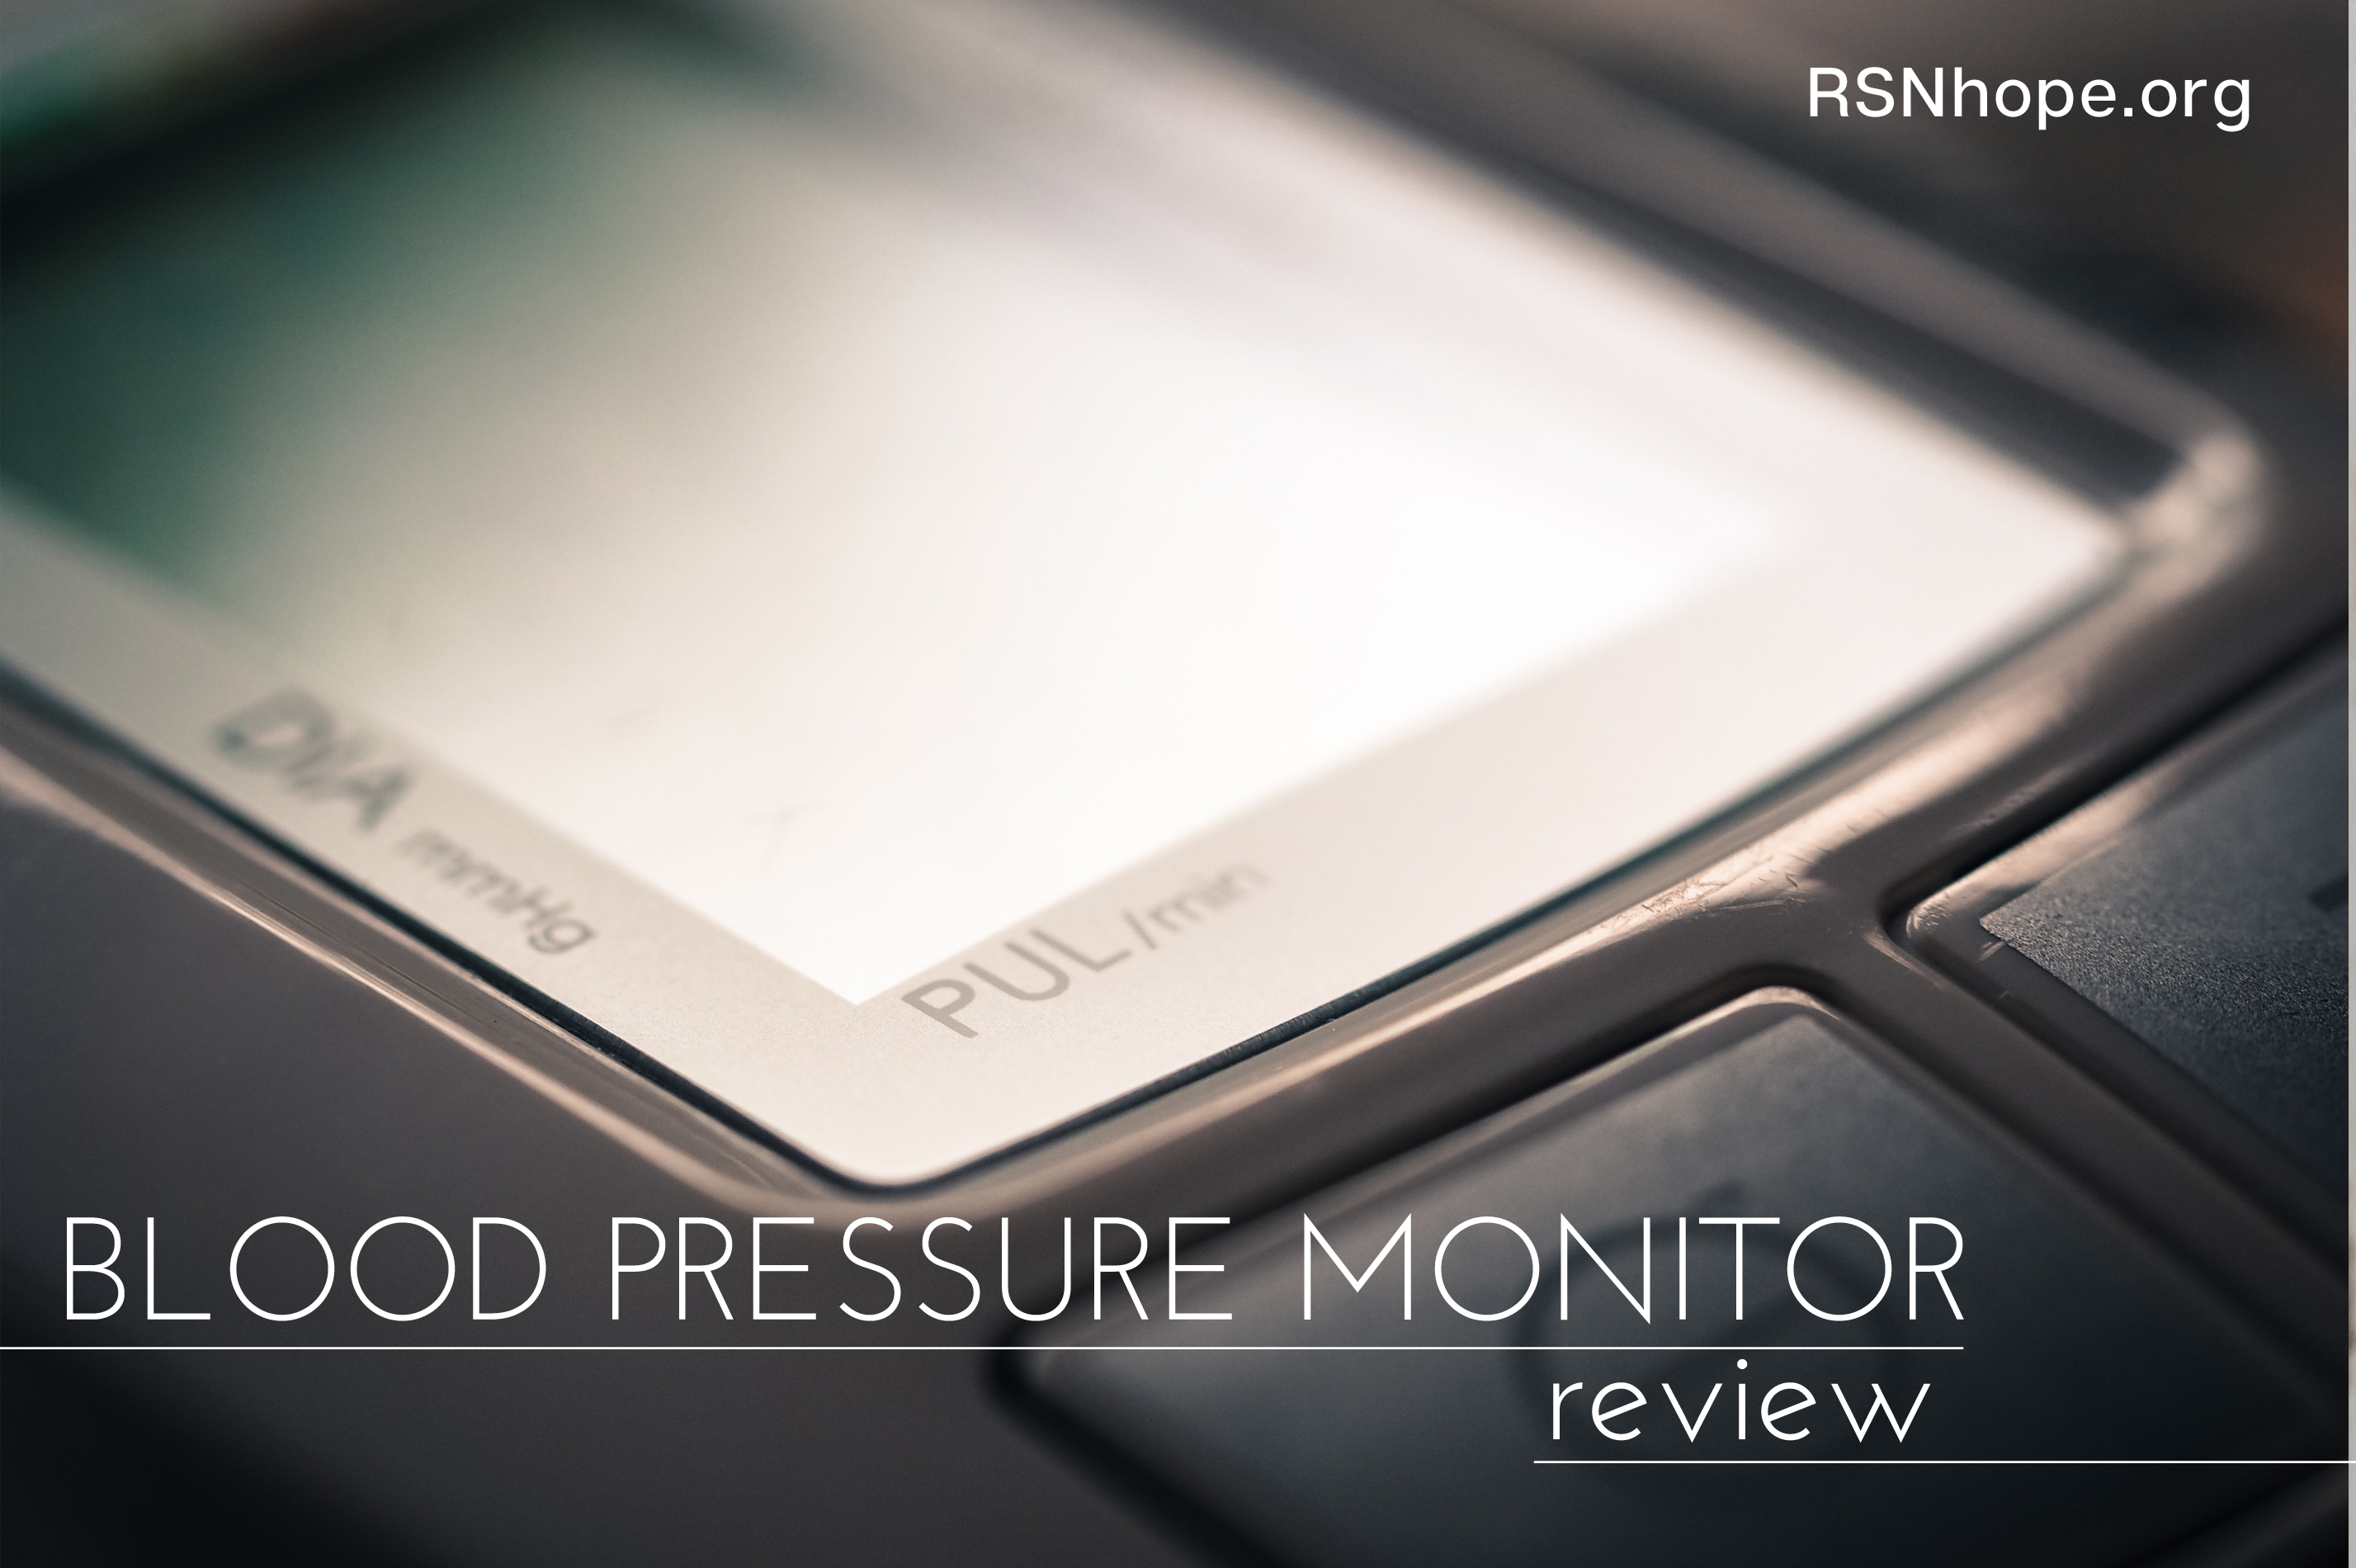 https://www.rsnhope.org/wp-content/uploads/2011/01/Blood-Pressure-Monitor-Review-2.jpg